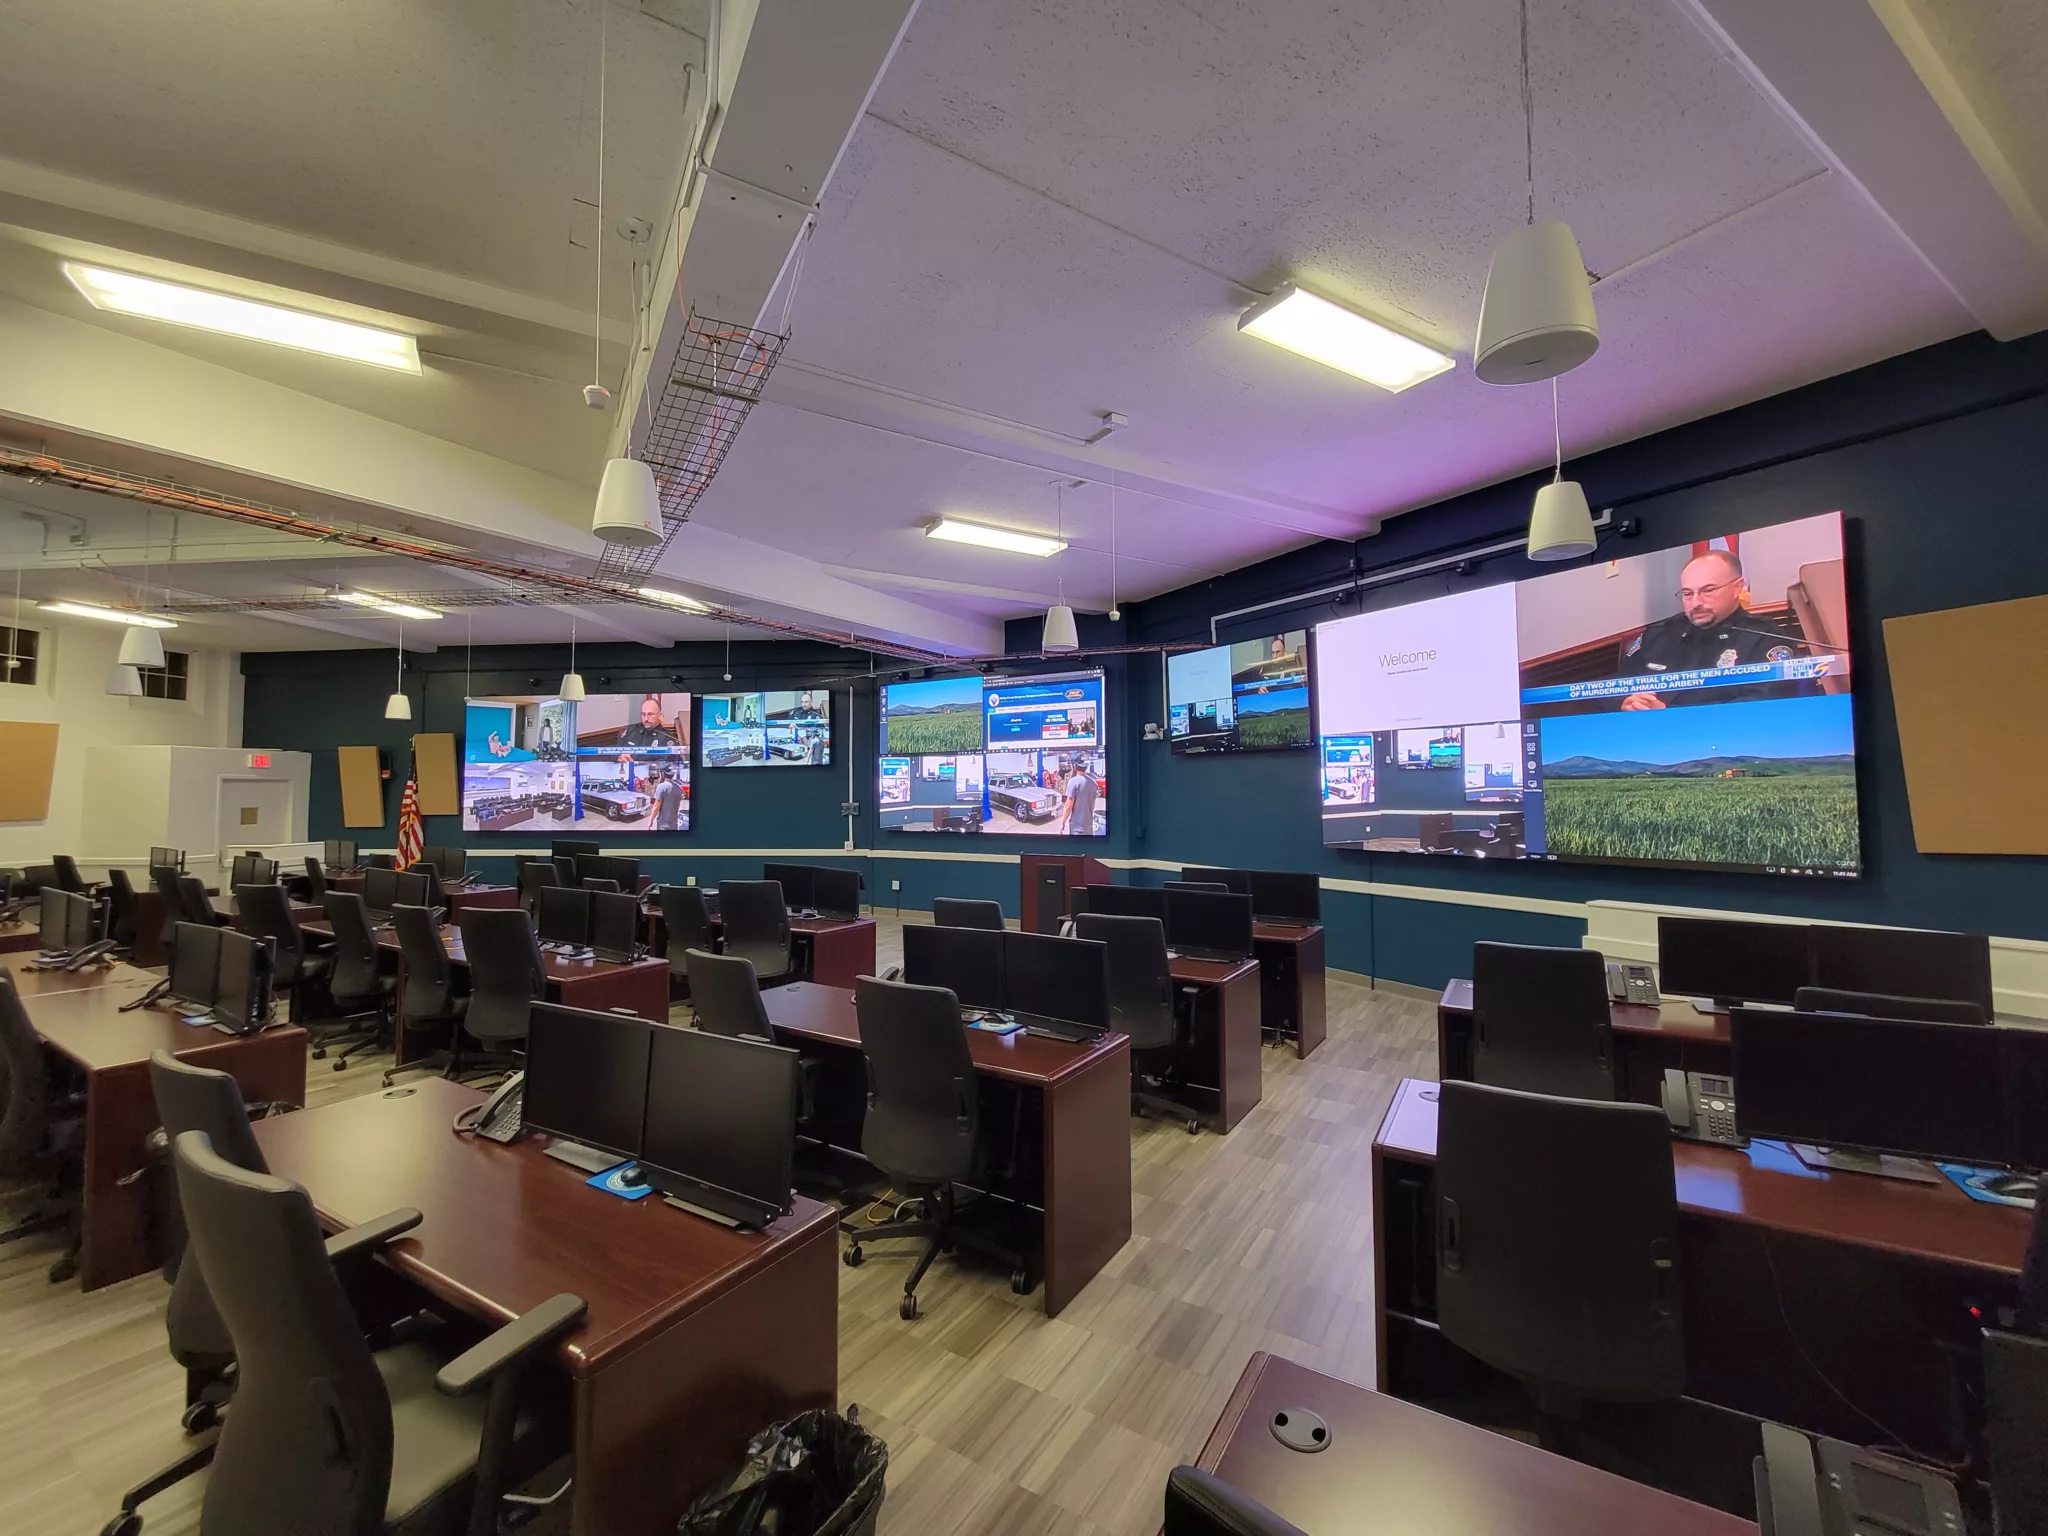 Audio visual installation from MCC showing sound systems, digital signage, and video conferencing